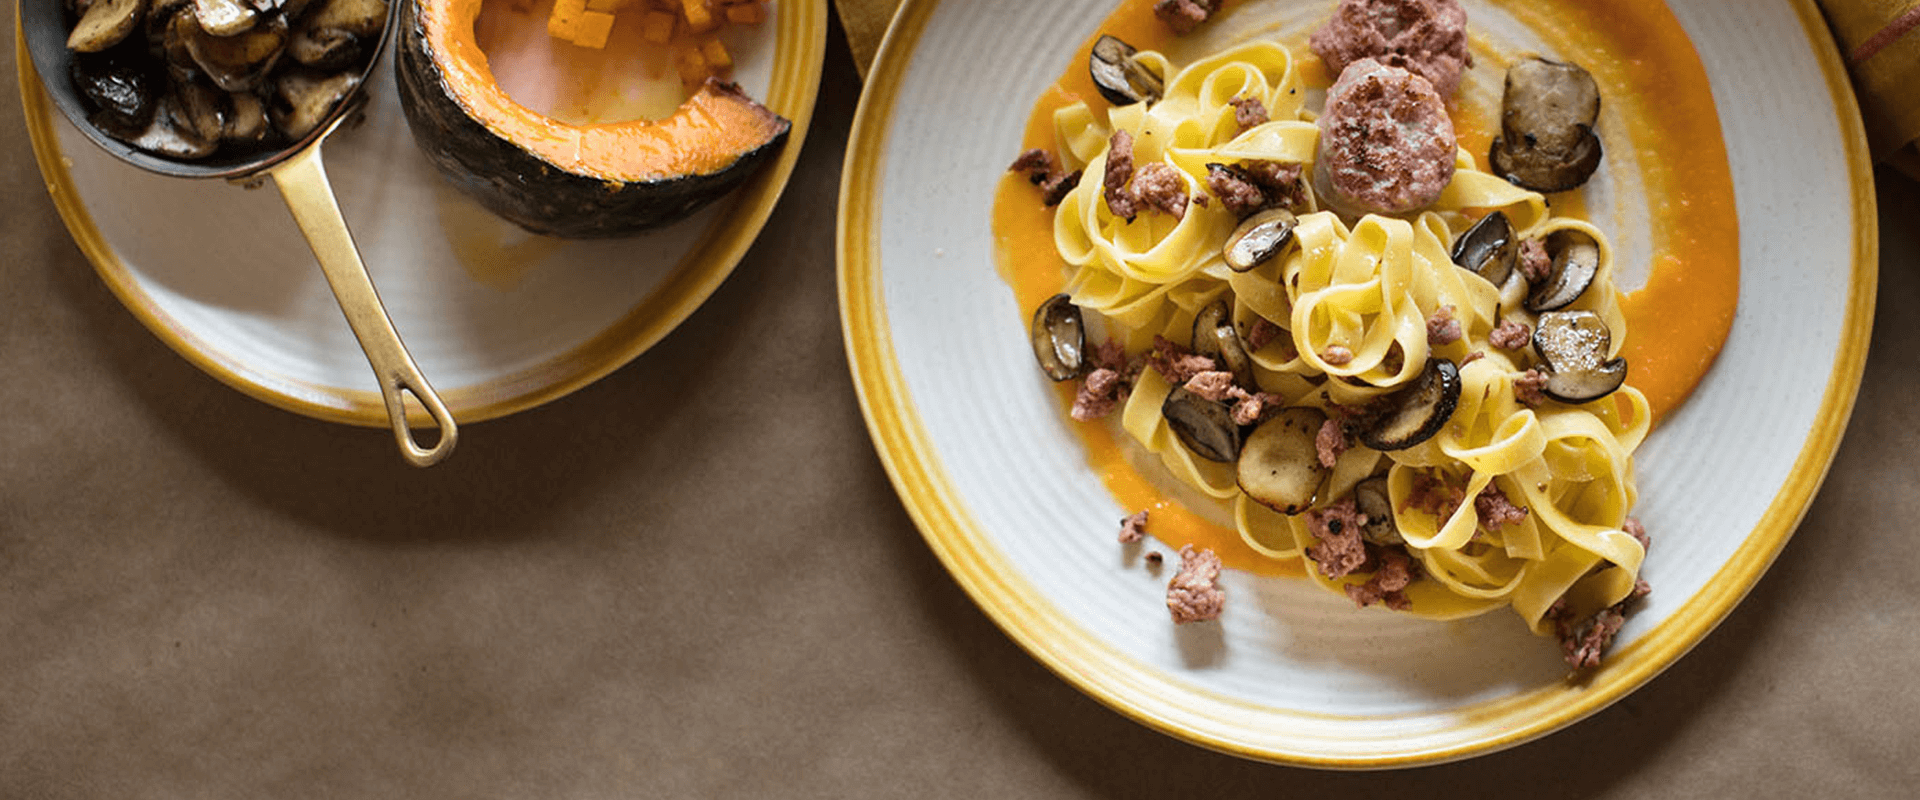 CA_FETTUCCINE-WITH-PUMPKIN-SAUCE-PORCINI-MUSHROOMS-AND-SAUSAGE_1920x800.png